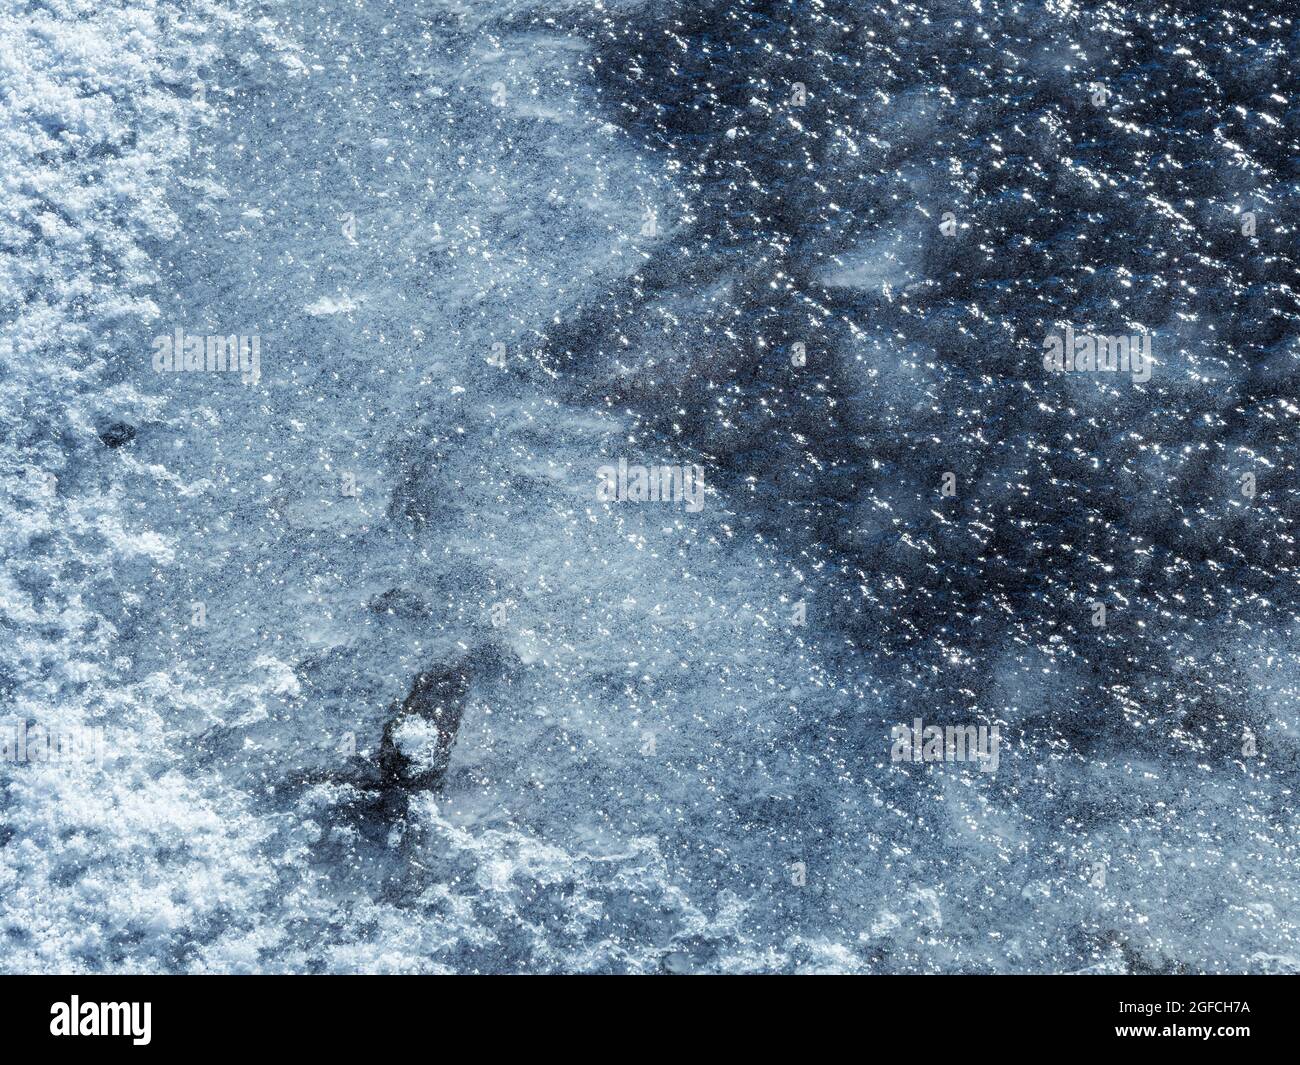 frozen water surface of river, close up view. frozen body of water, abstract winter season background Stock Photo